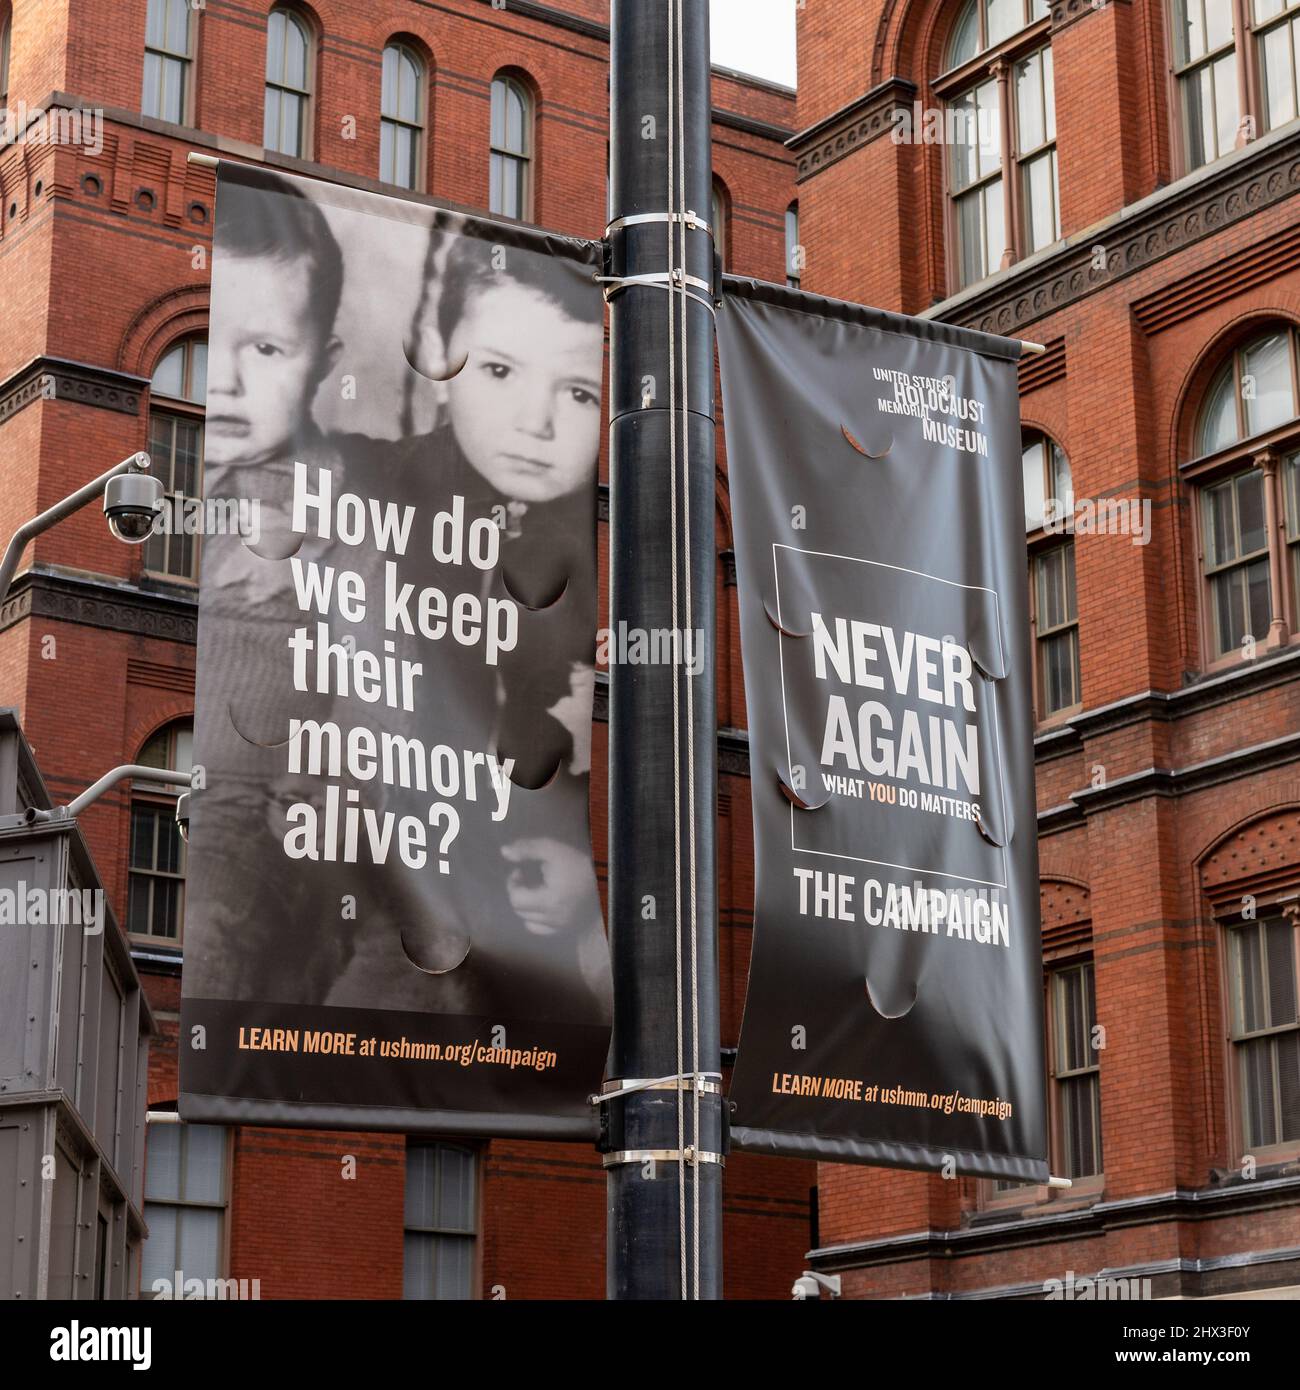 Washington D.C. - Nov. 22, 2021: Banner for the United States Holocaust Memorial Museum asks 'How do we keep their memory alive?' Stock Photo